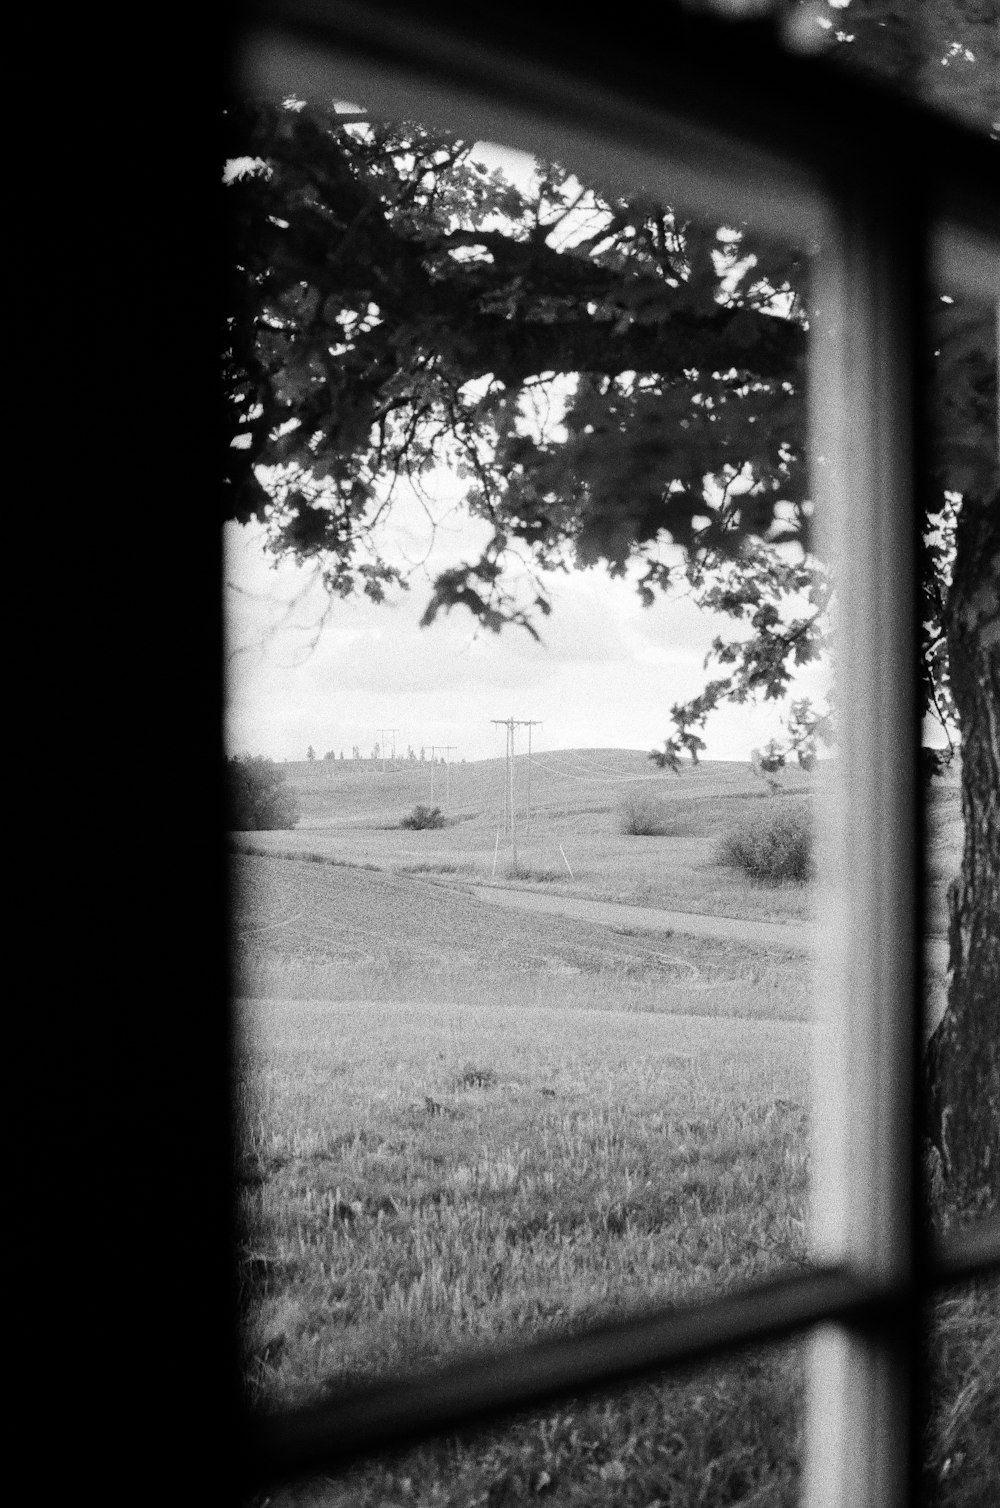 a view through a window of a field and trees